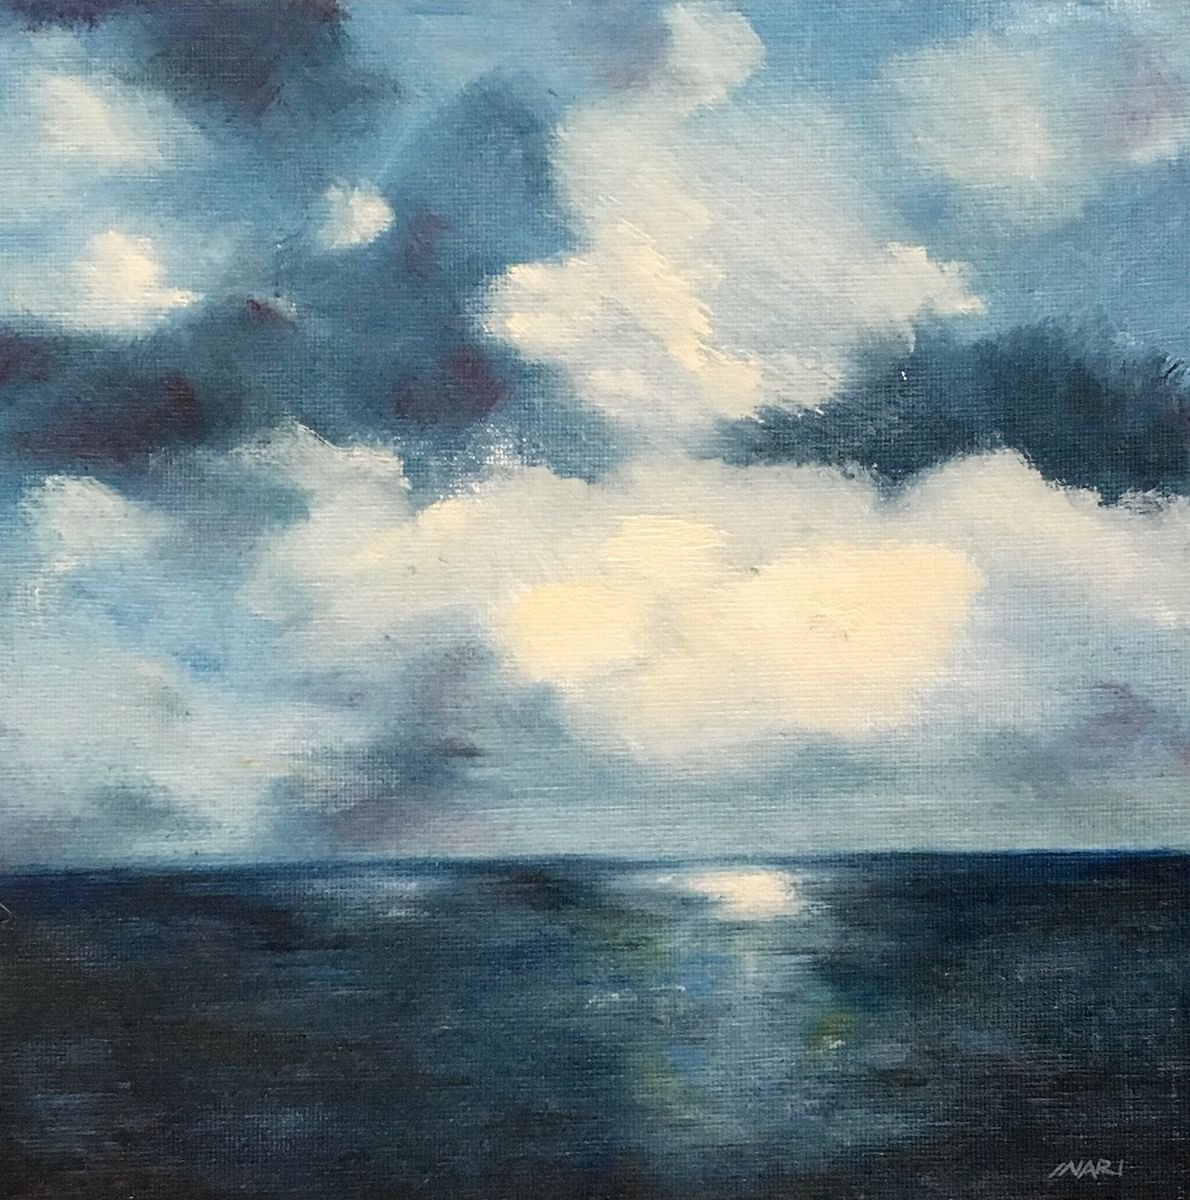 Stormy skies landscape painting small oil painting by Inari